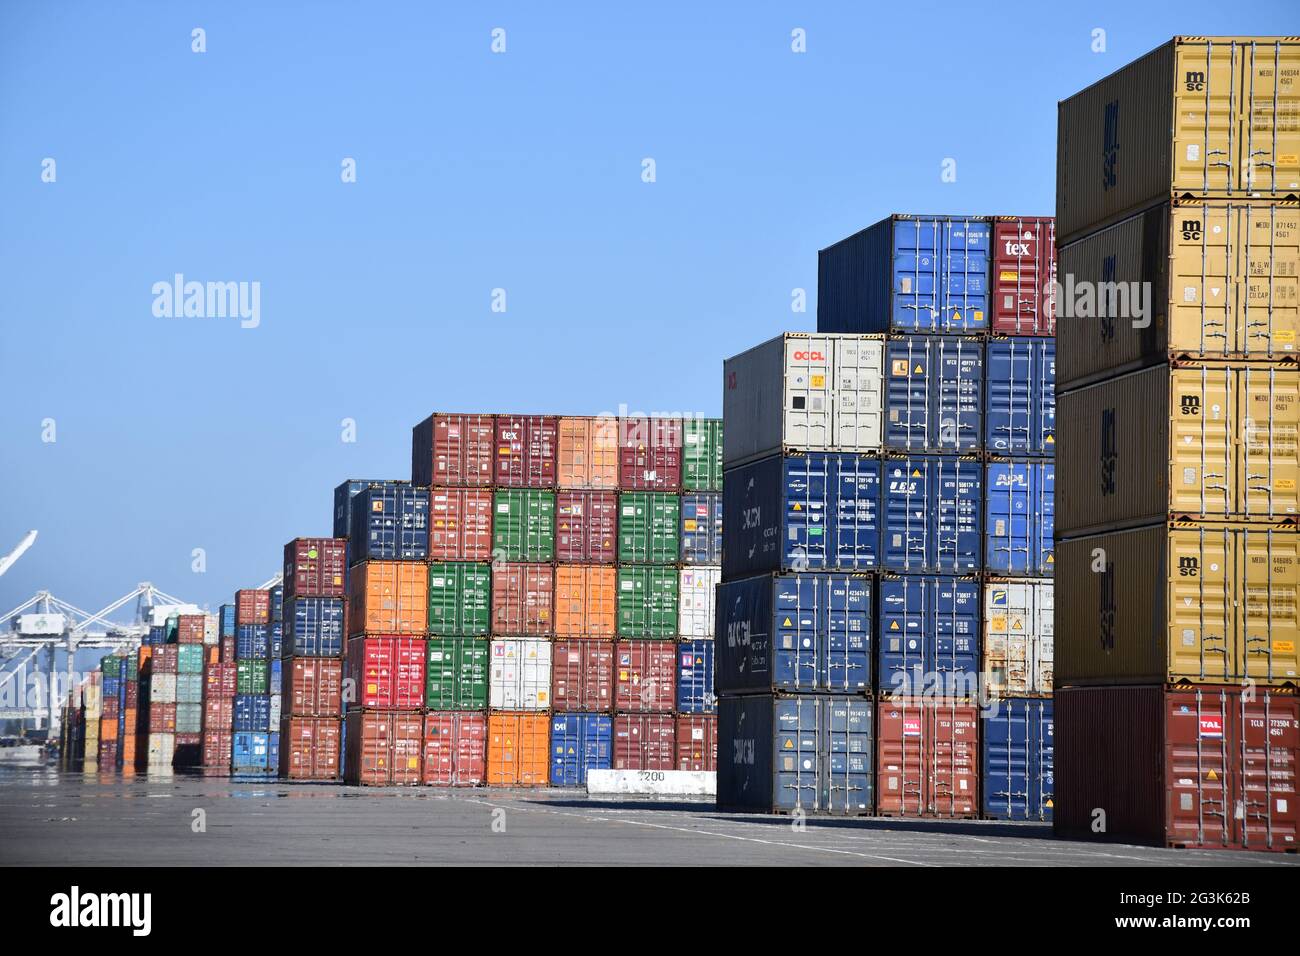 Shipping containers are loaded onto ships at the Port of Oakland, California, one of the busiest global freight ports on the West Coast. Stock Photo